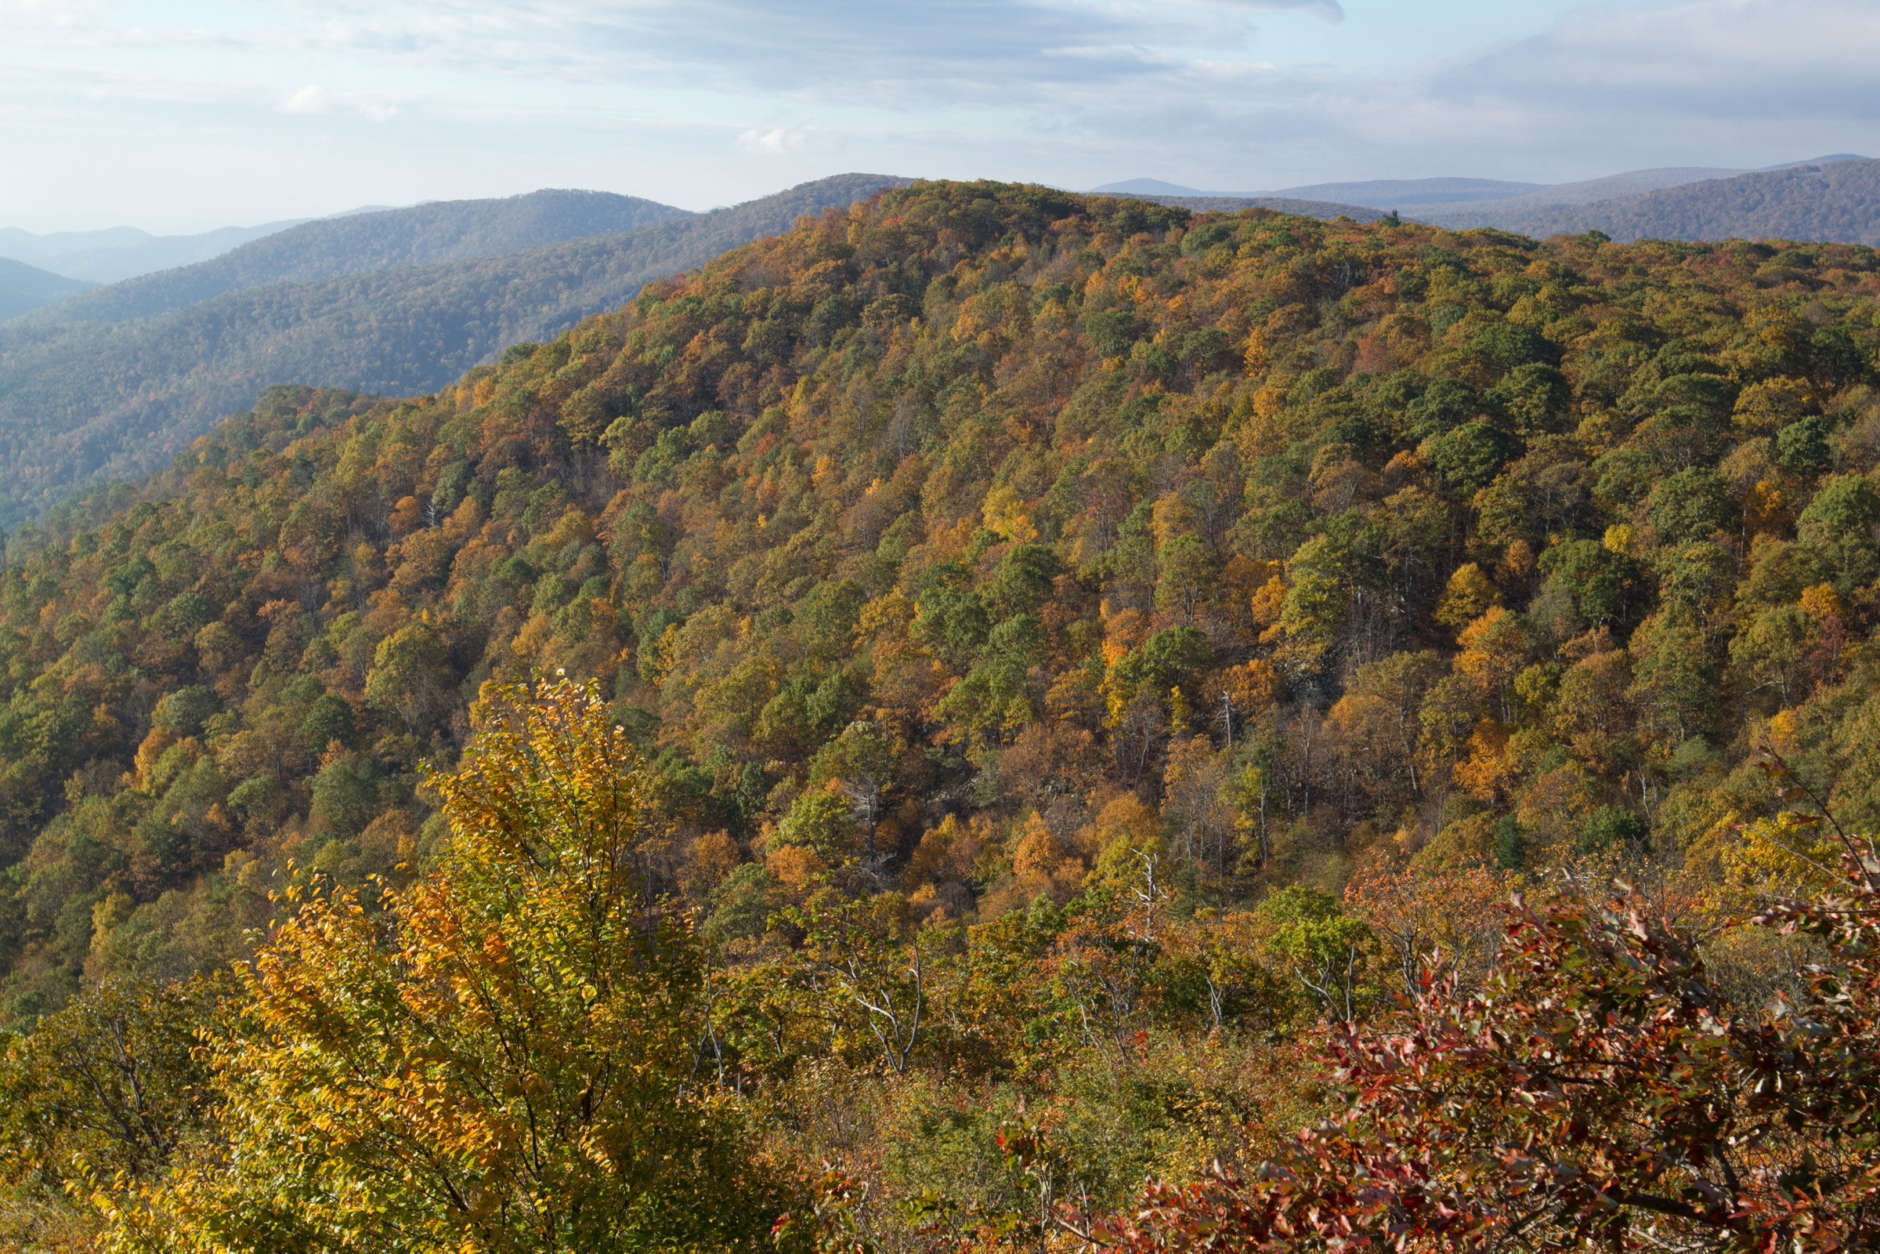 Foliage seen from the Pinnacles Overlook on Skyline Drive, in Shenandoah National Park Nov. 1, 2017. (National Park Service/Margaret Barse)